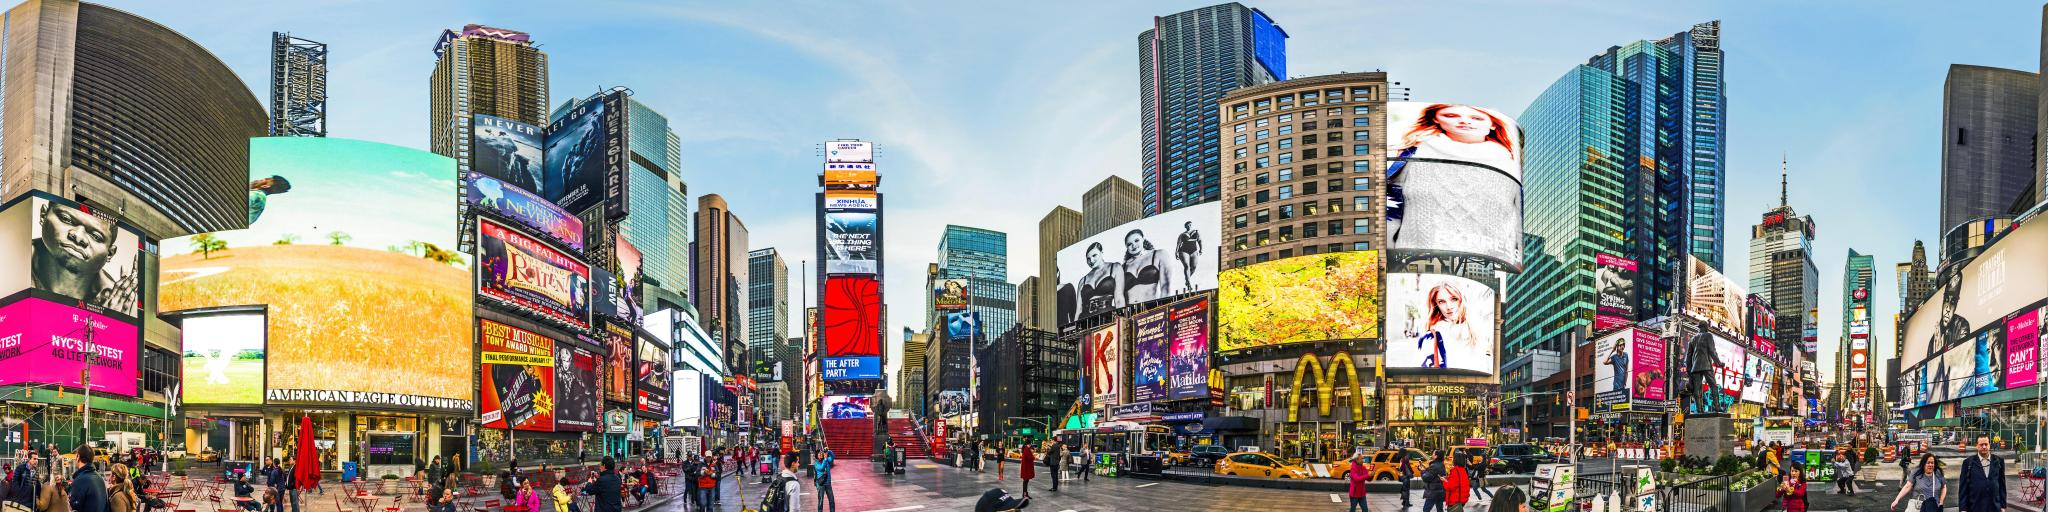 Wide view of Times Square billboards on LED signs, New York